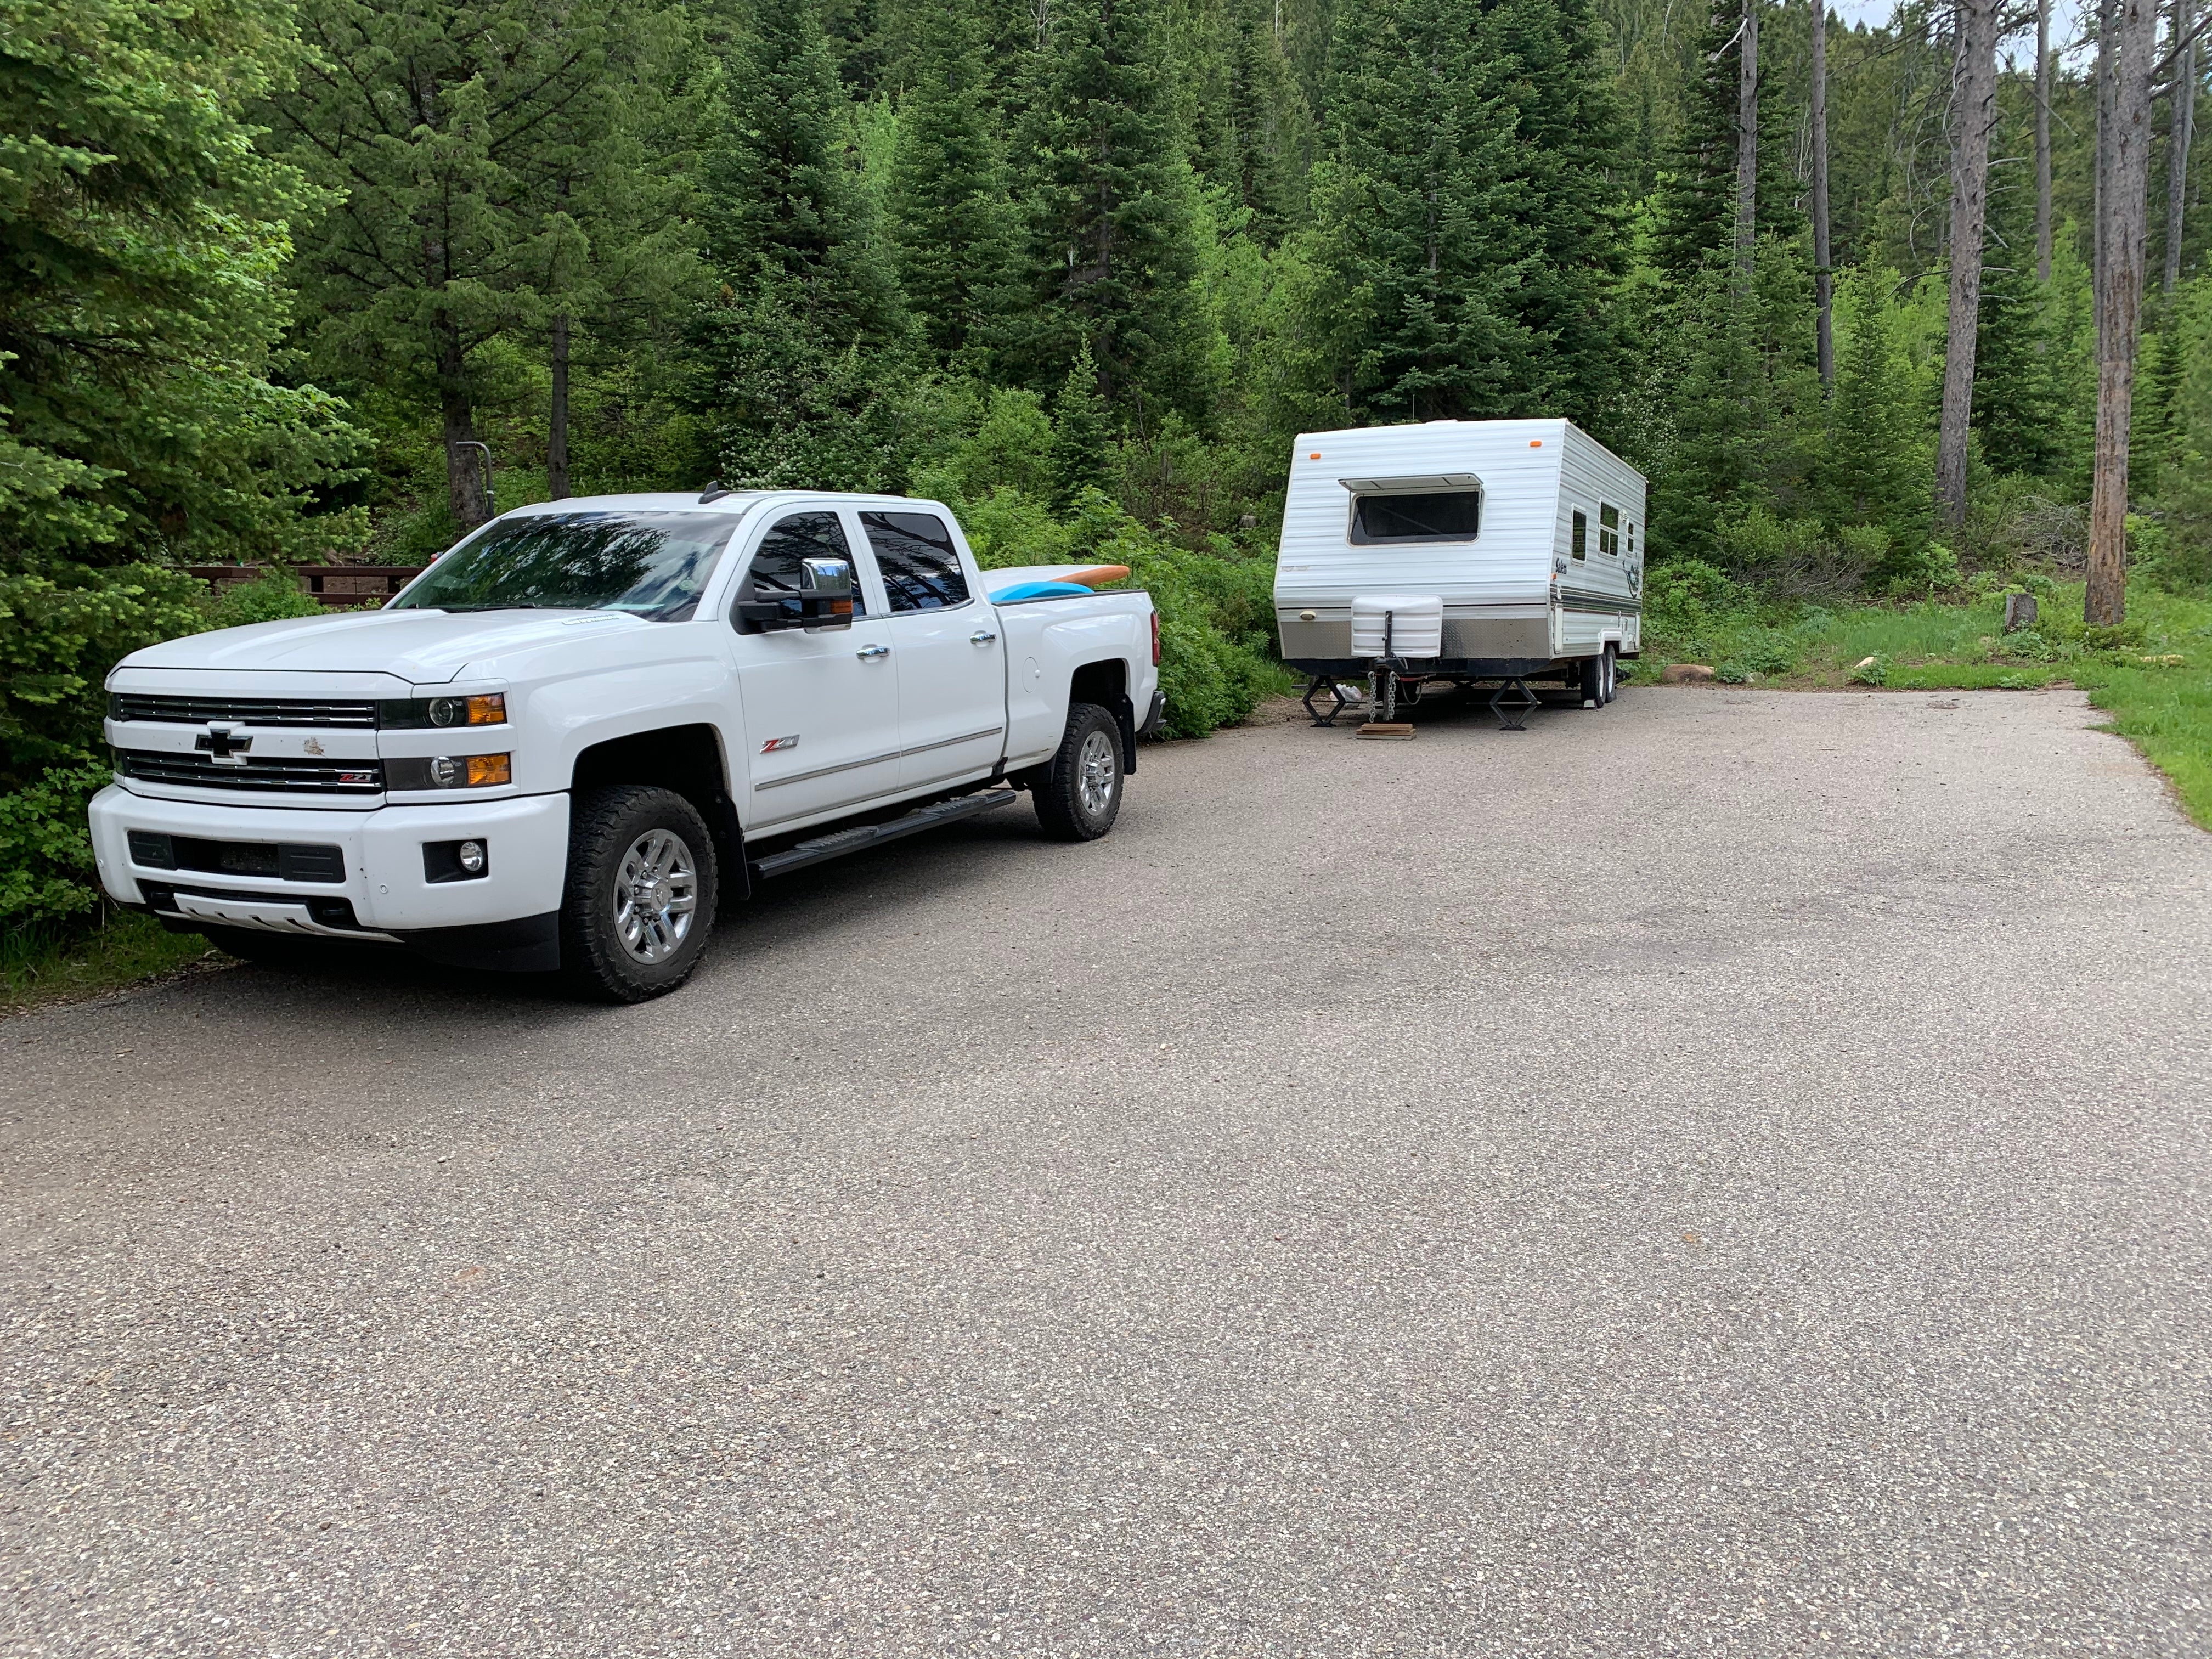 Camper submitted image from Porcupine Campground - 3